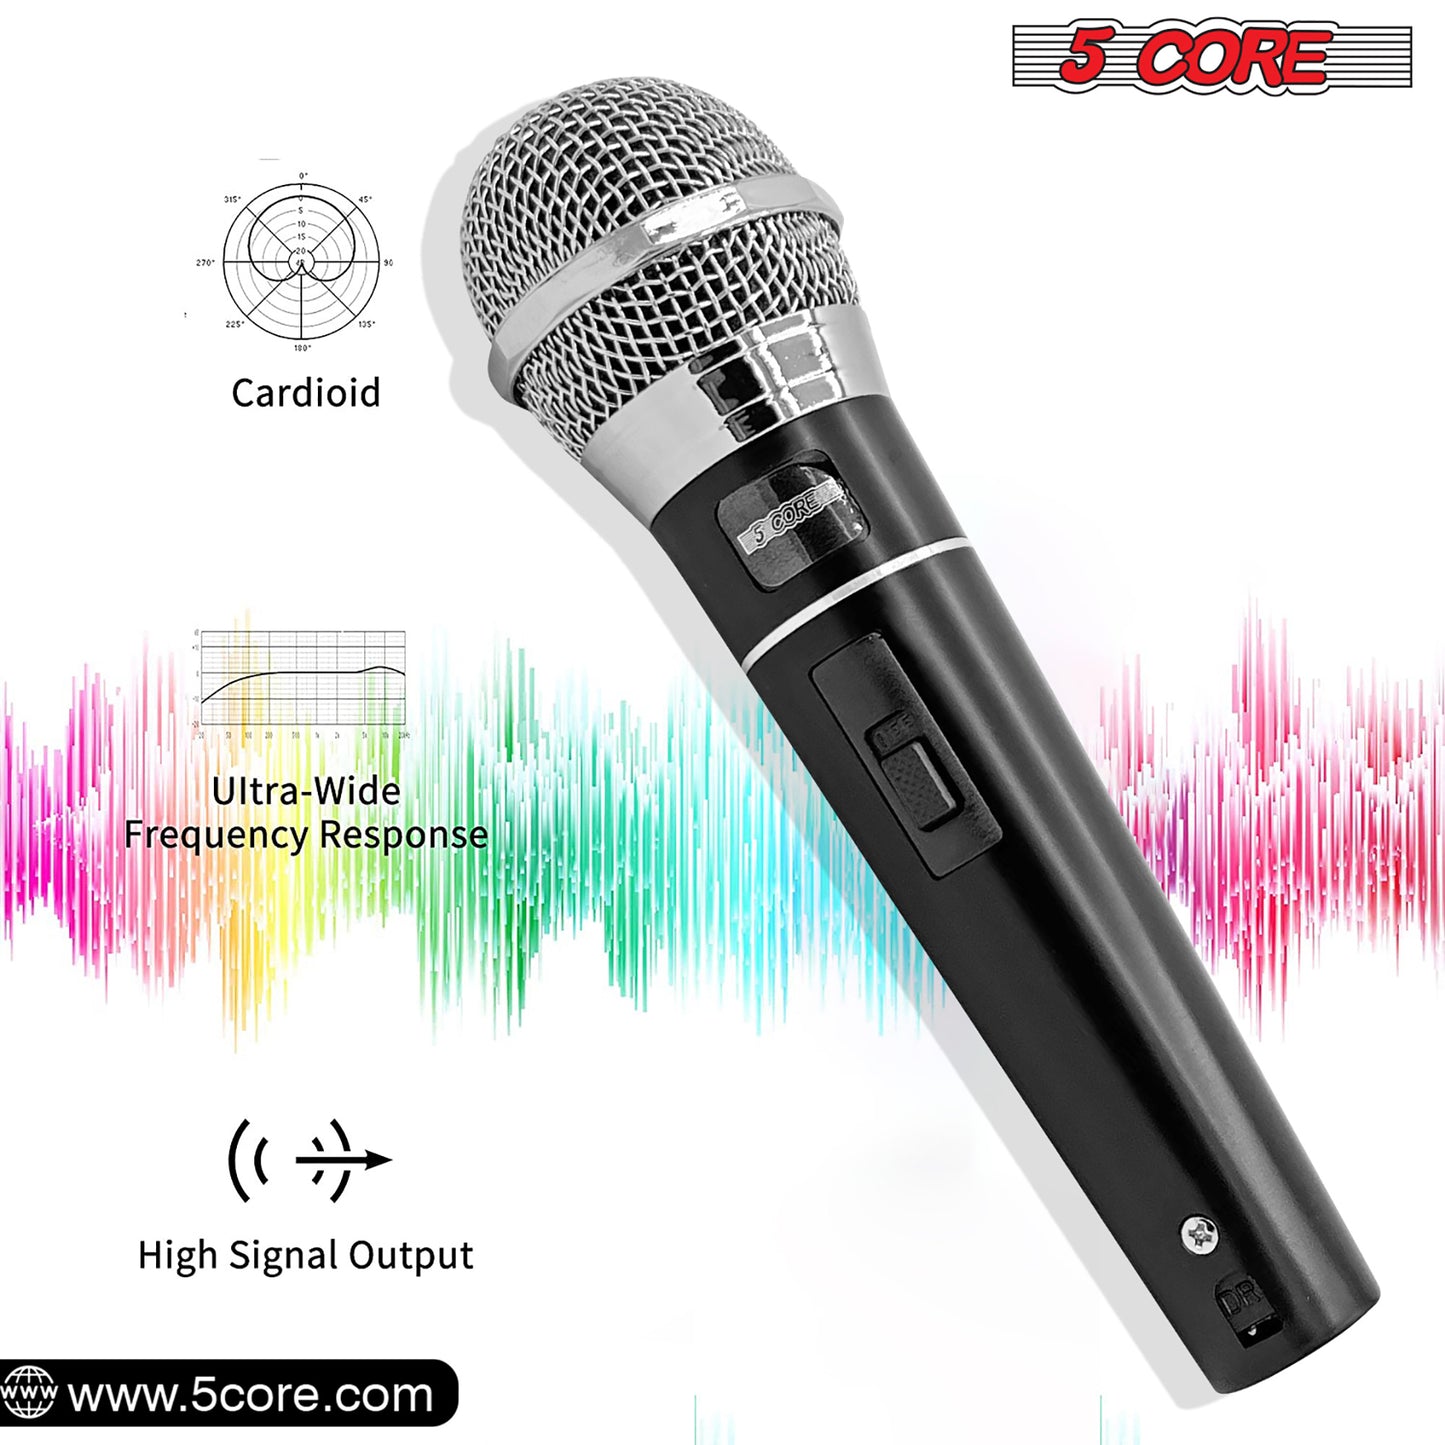 5 CORE Premium Vocal Dynamic Cardioid Handheld Microphone Unidirectional Mic with 16ft Detachable XLR Cable to ? inch Audio Jack and On/Off Switch for Karaoke Singing PM 100